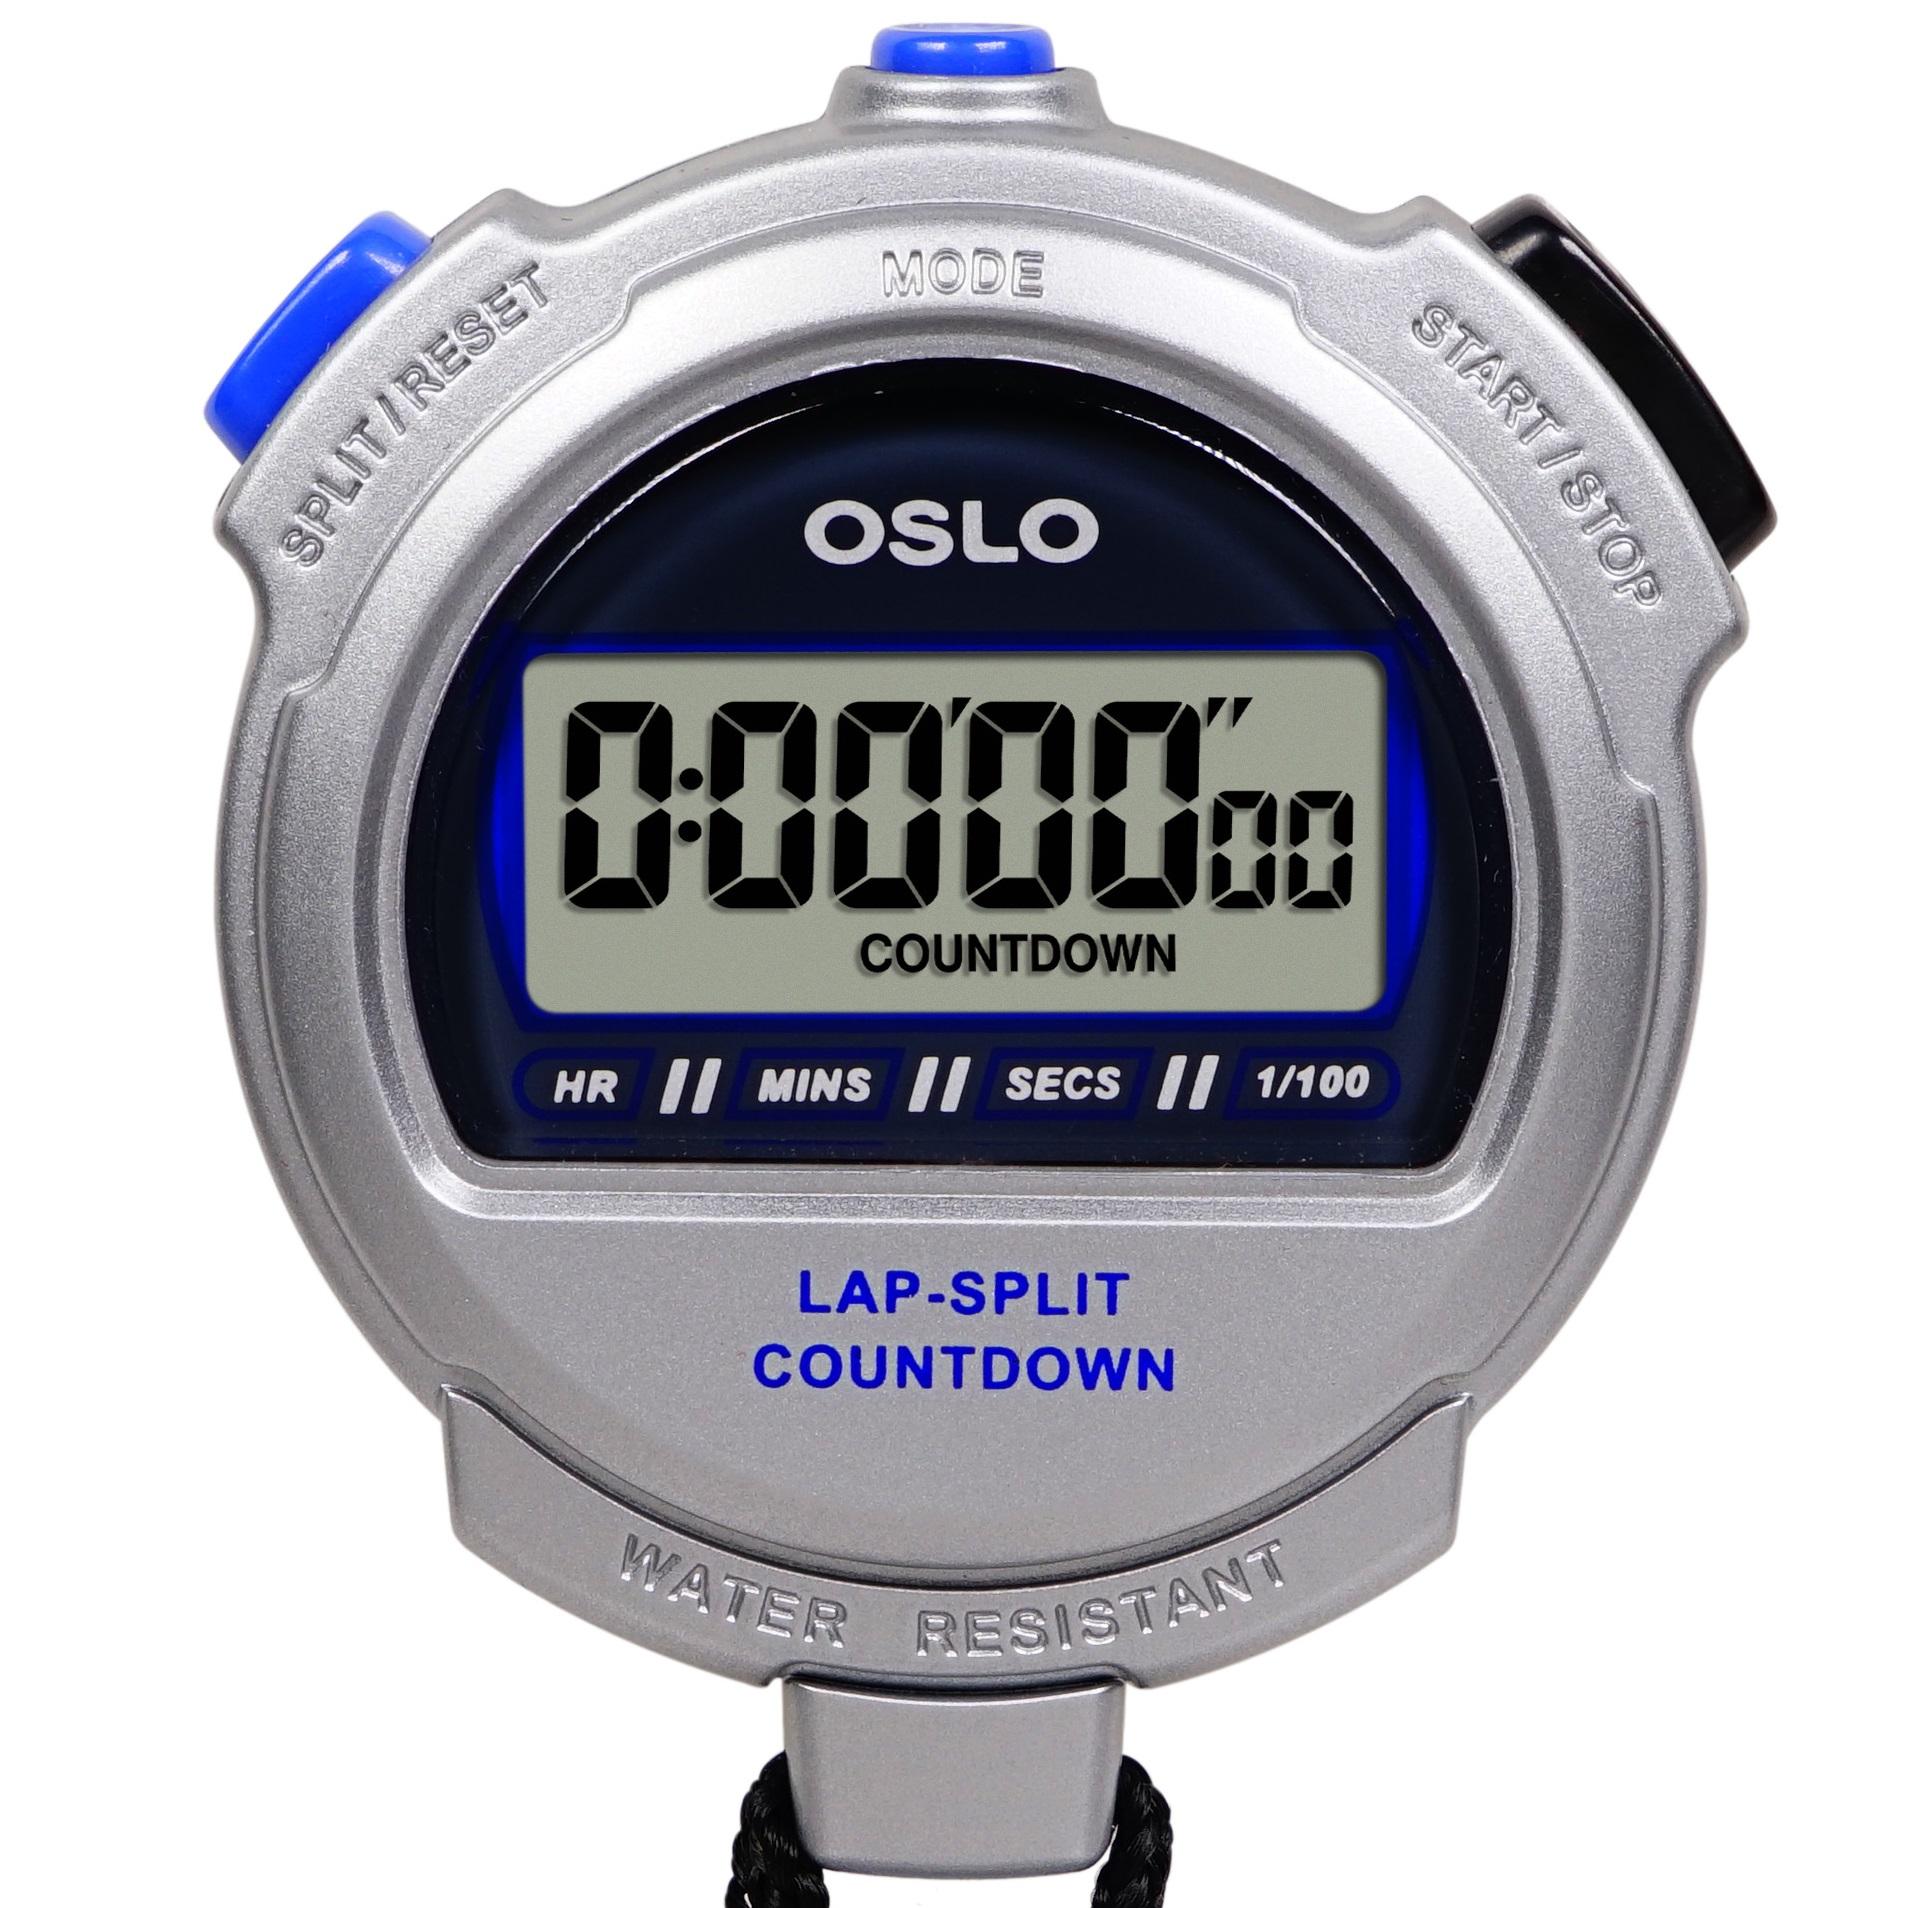 Amazon.com : Oslo Silver 2.0 Twin Stopwatch and Countdown Timer ...